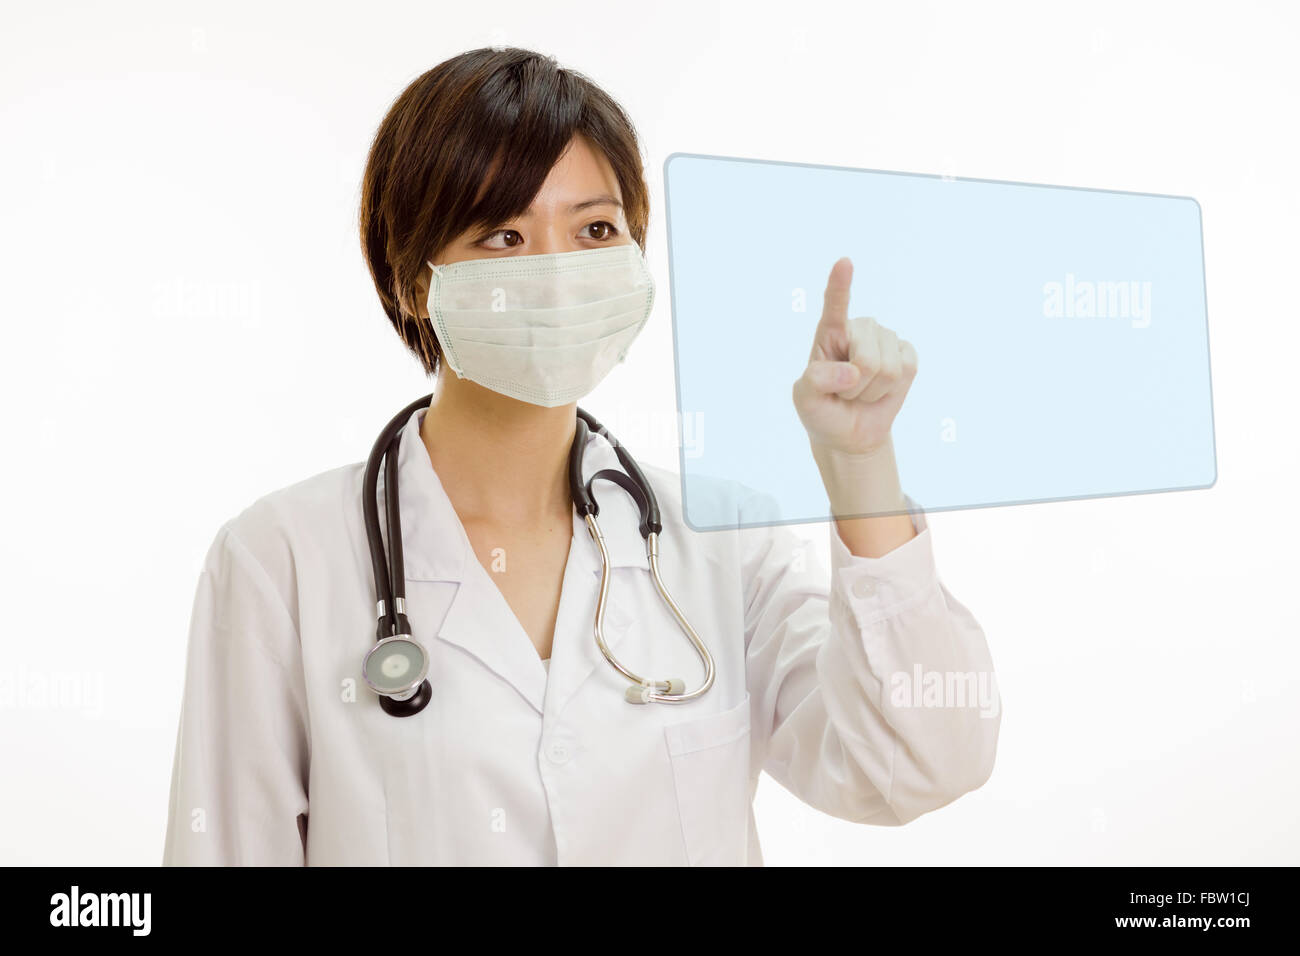 Chinese female doctor with stethoscope pressing virtual interface Stock Photo